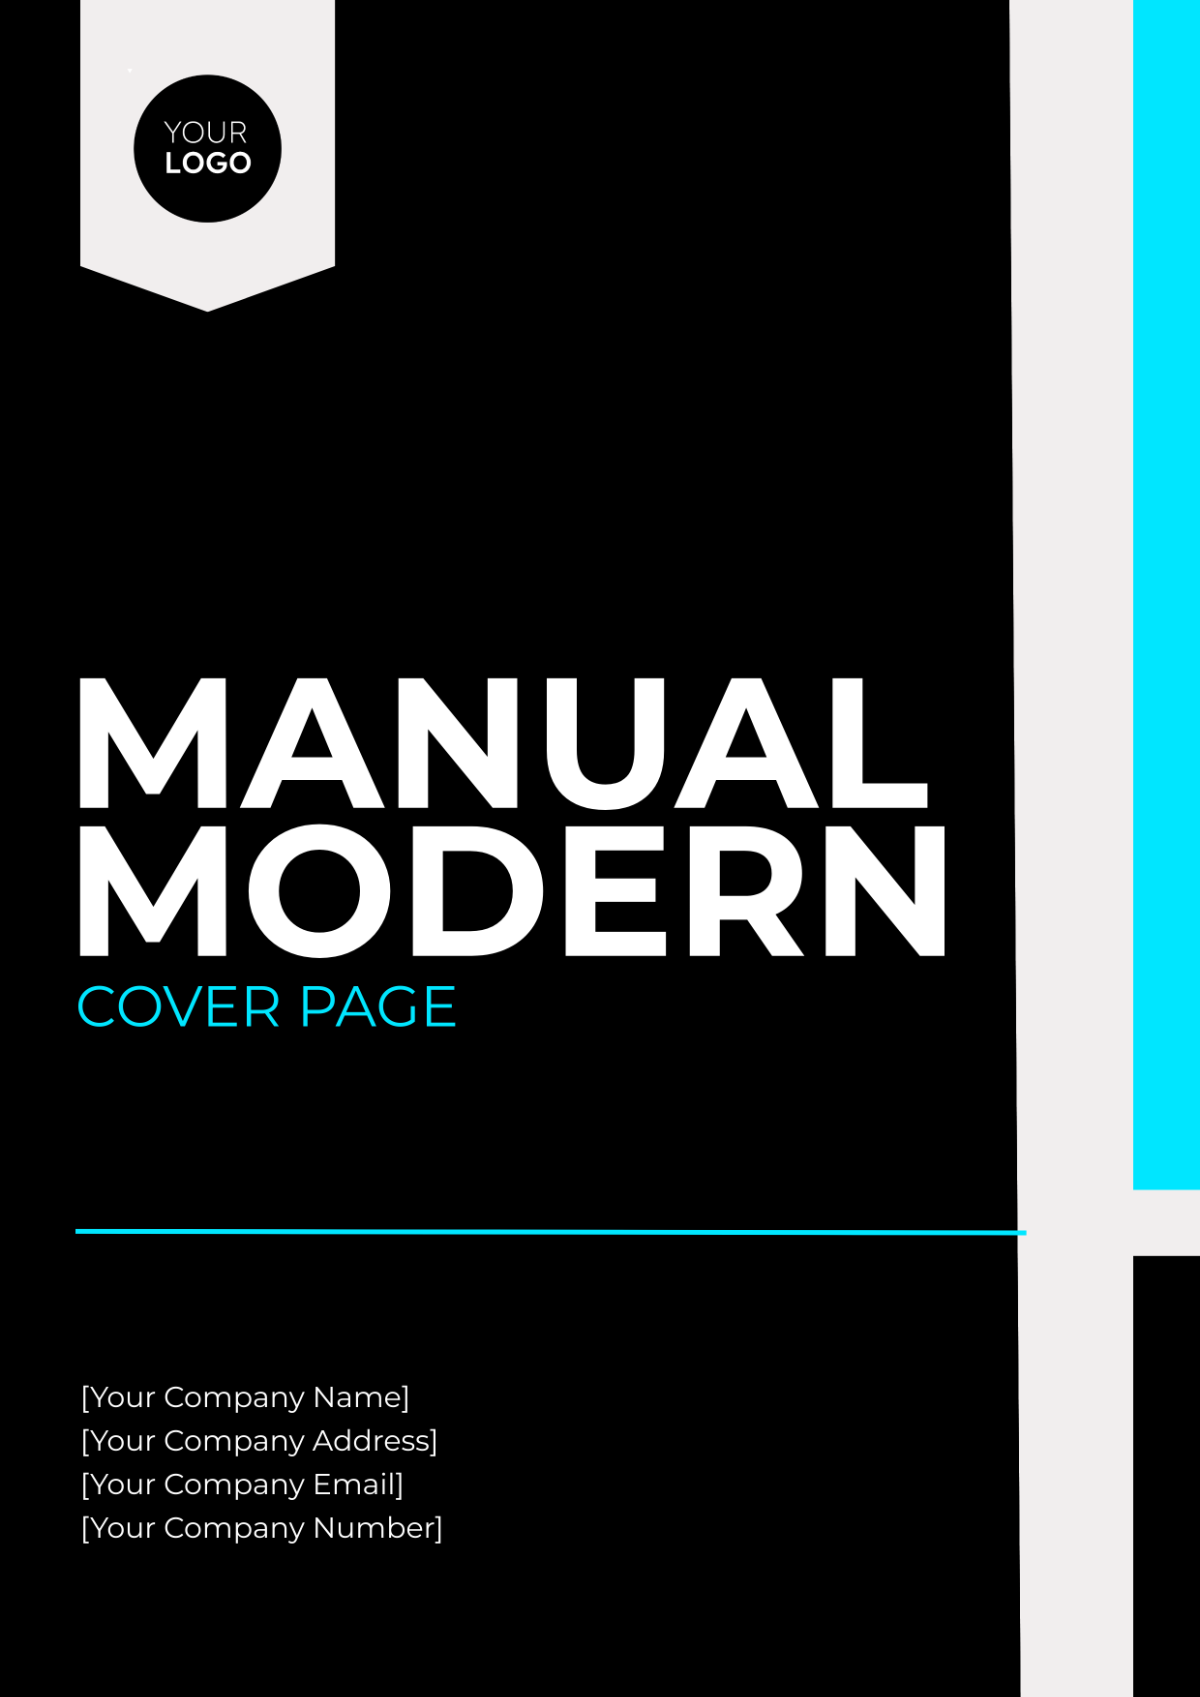 Manual Modern Cover Page